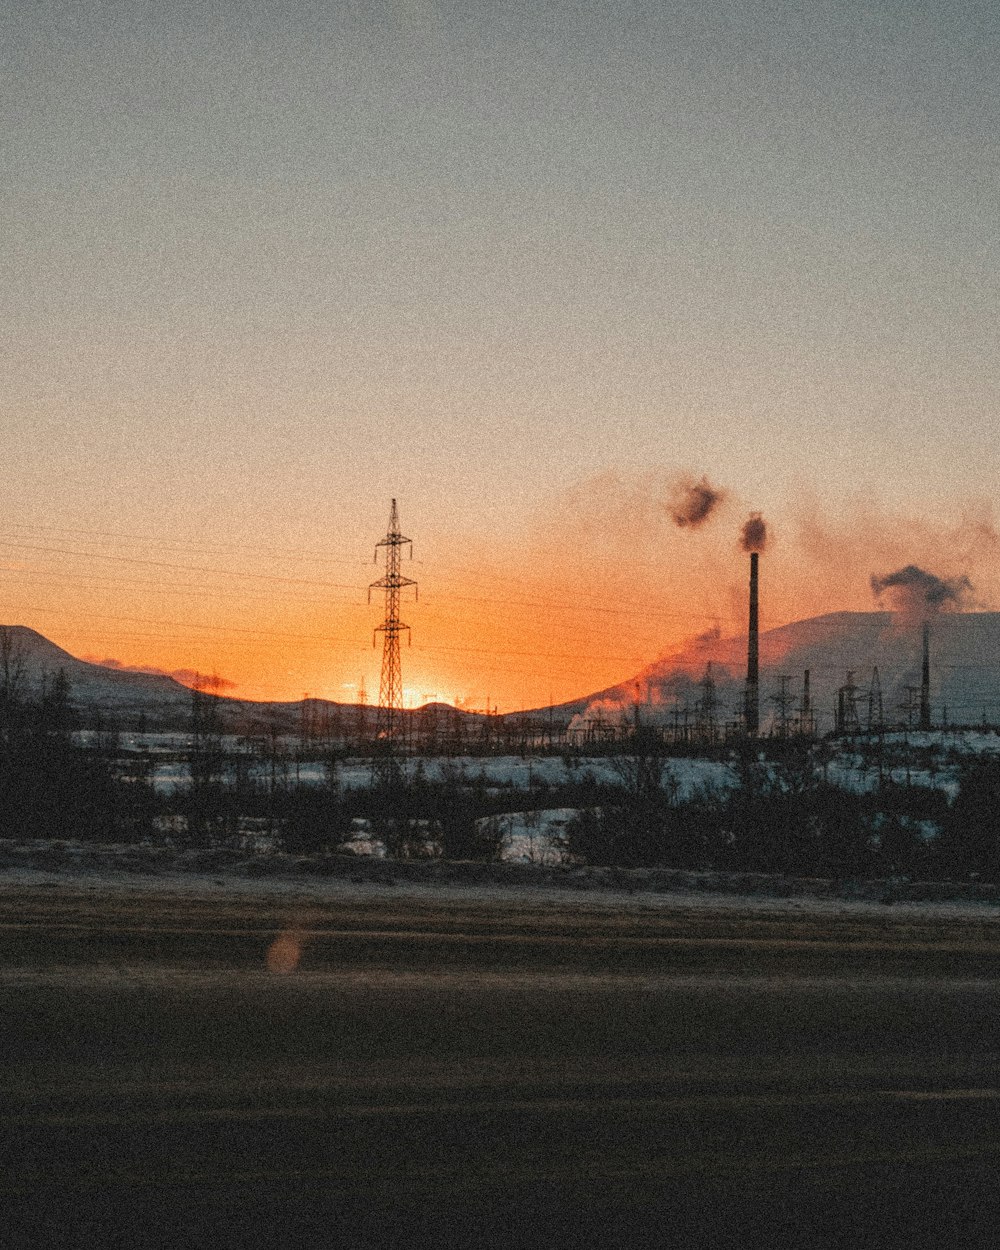 the sun is setting behind a factory with smoke stacks